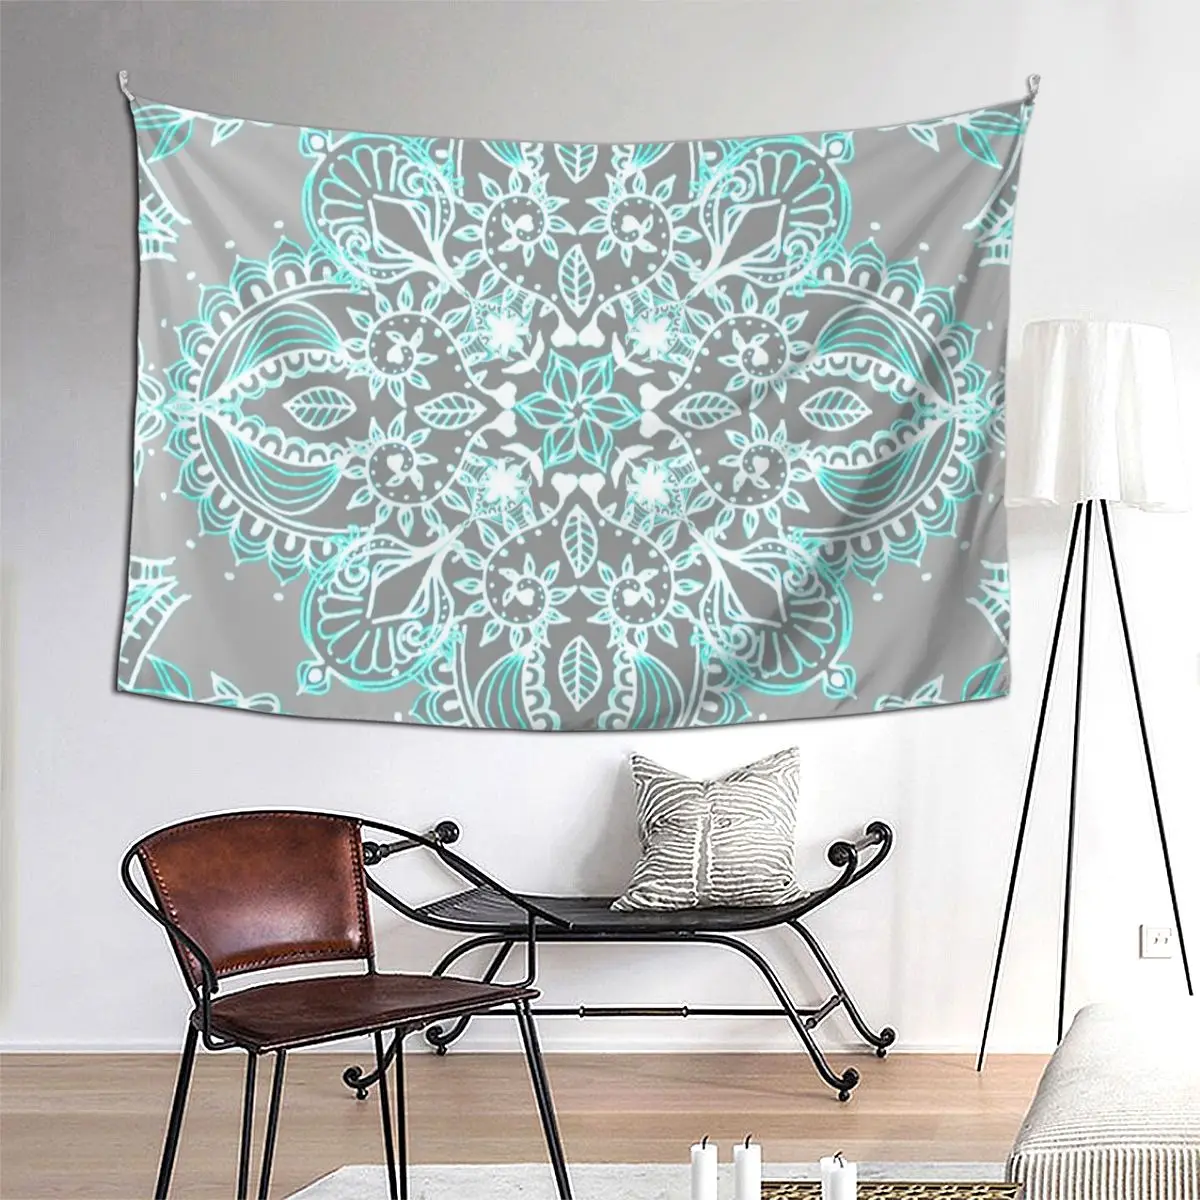 

Teal And Aqua Lace Mandala On Grey Tapestry Funny Wall Hanging Aesthetic Home Decor Tapestries for Living Room Bedroom Dorm Room